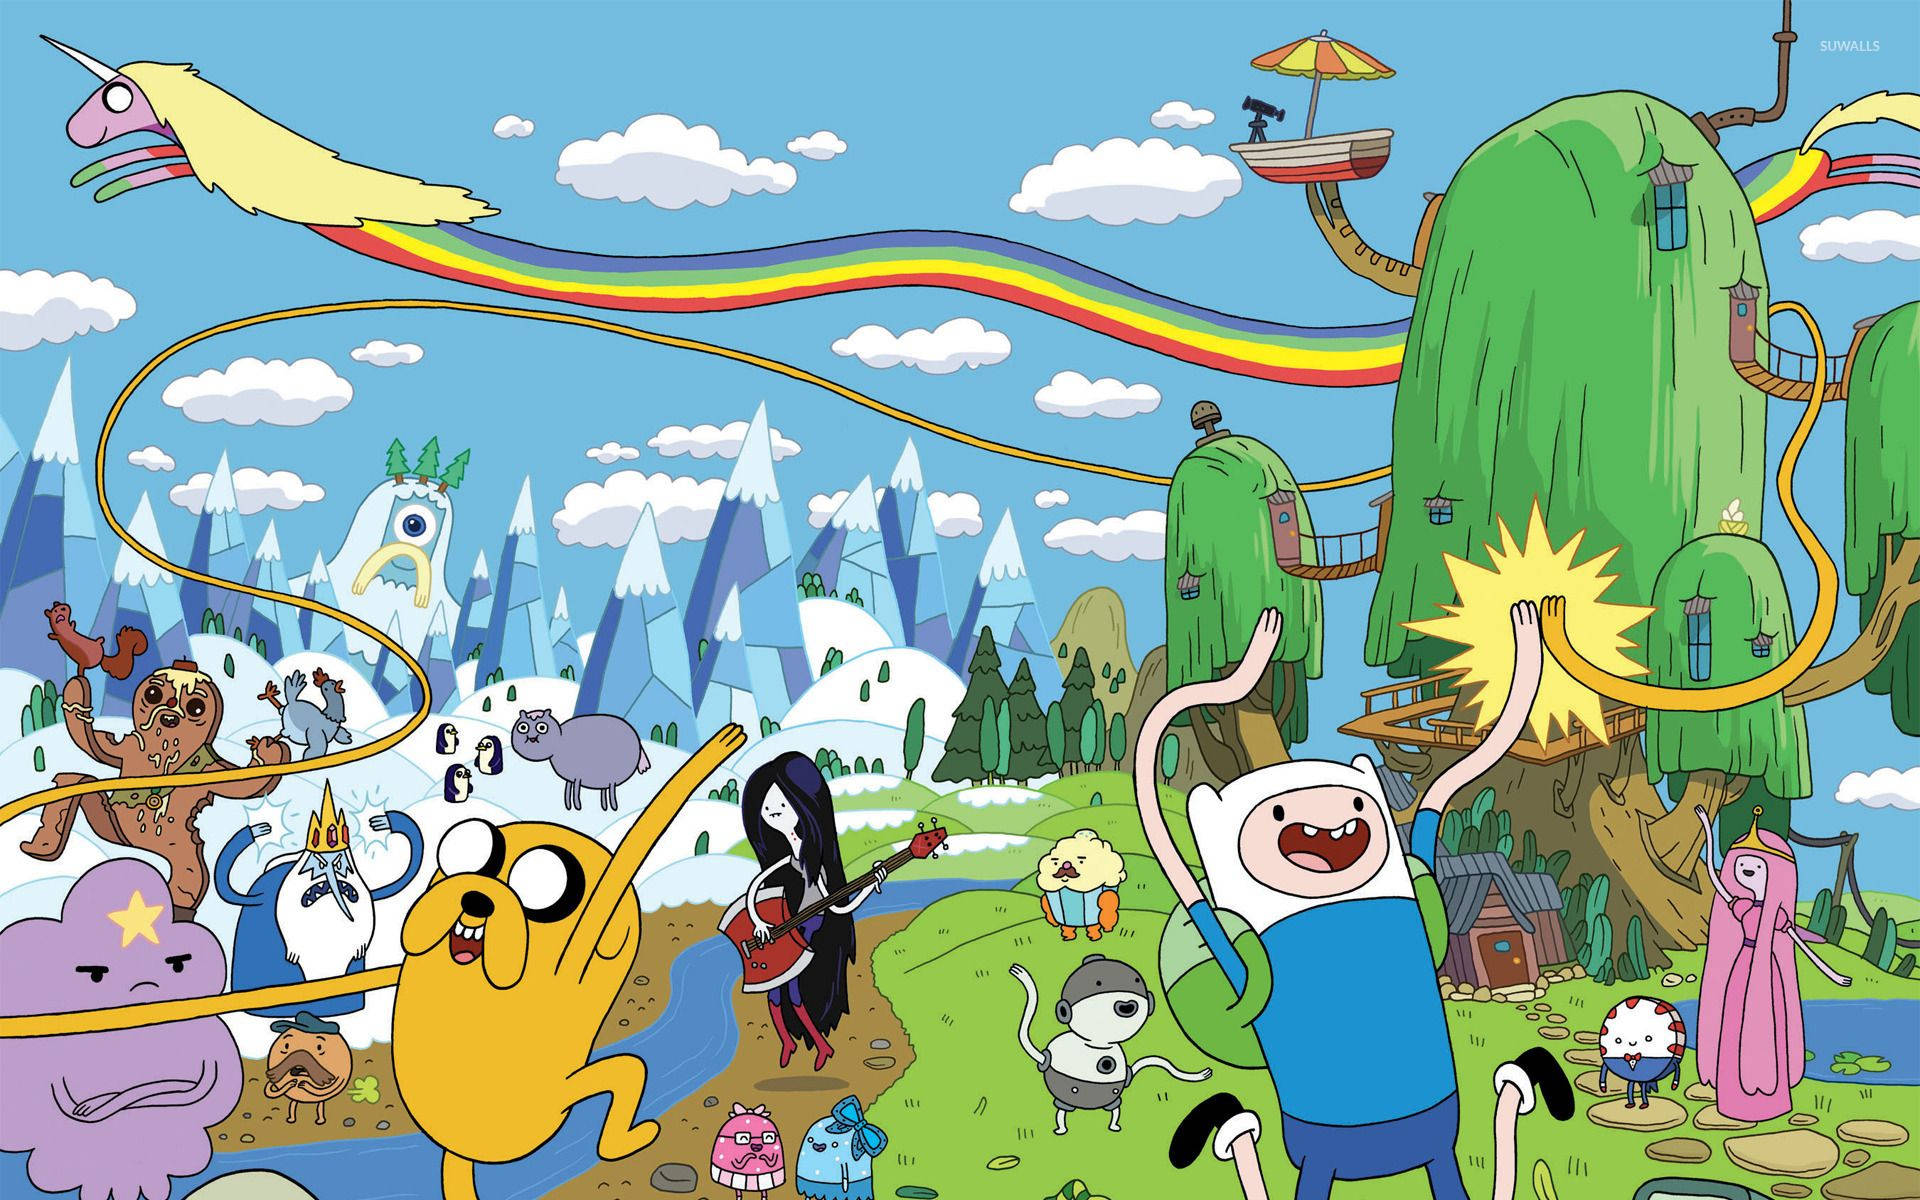 Let's explore the magical Land of Ooo with Finn and his friends! Wallpaper